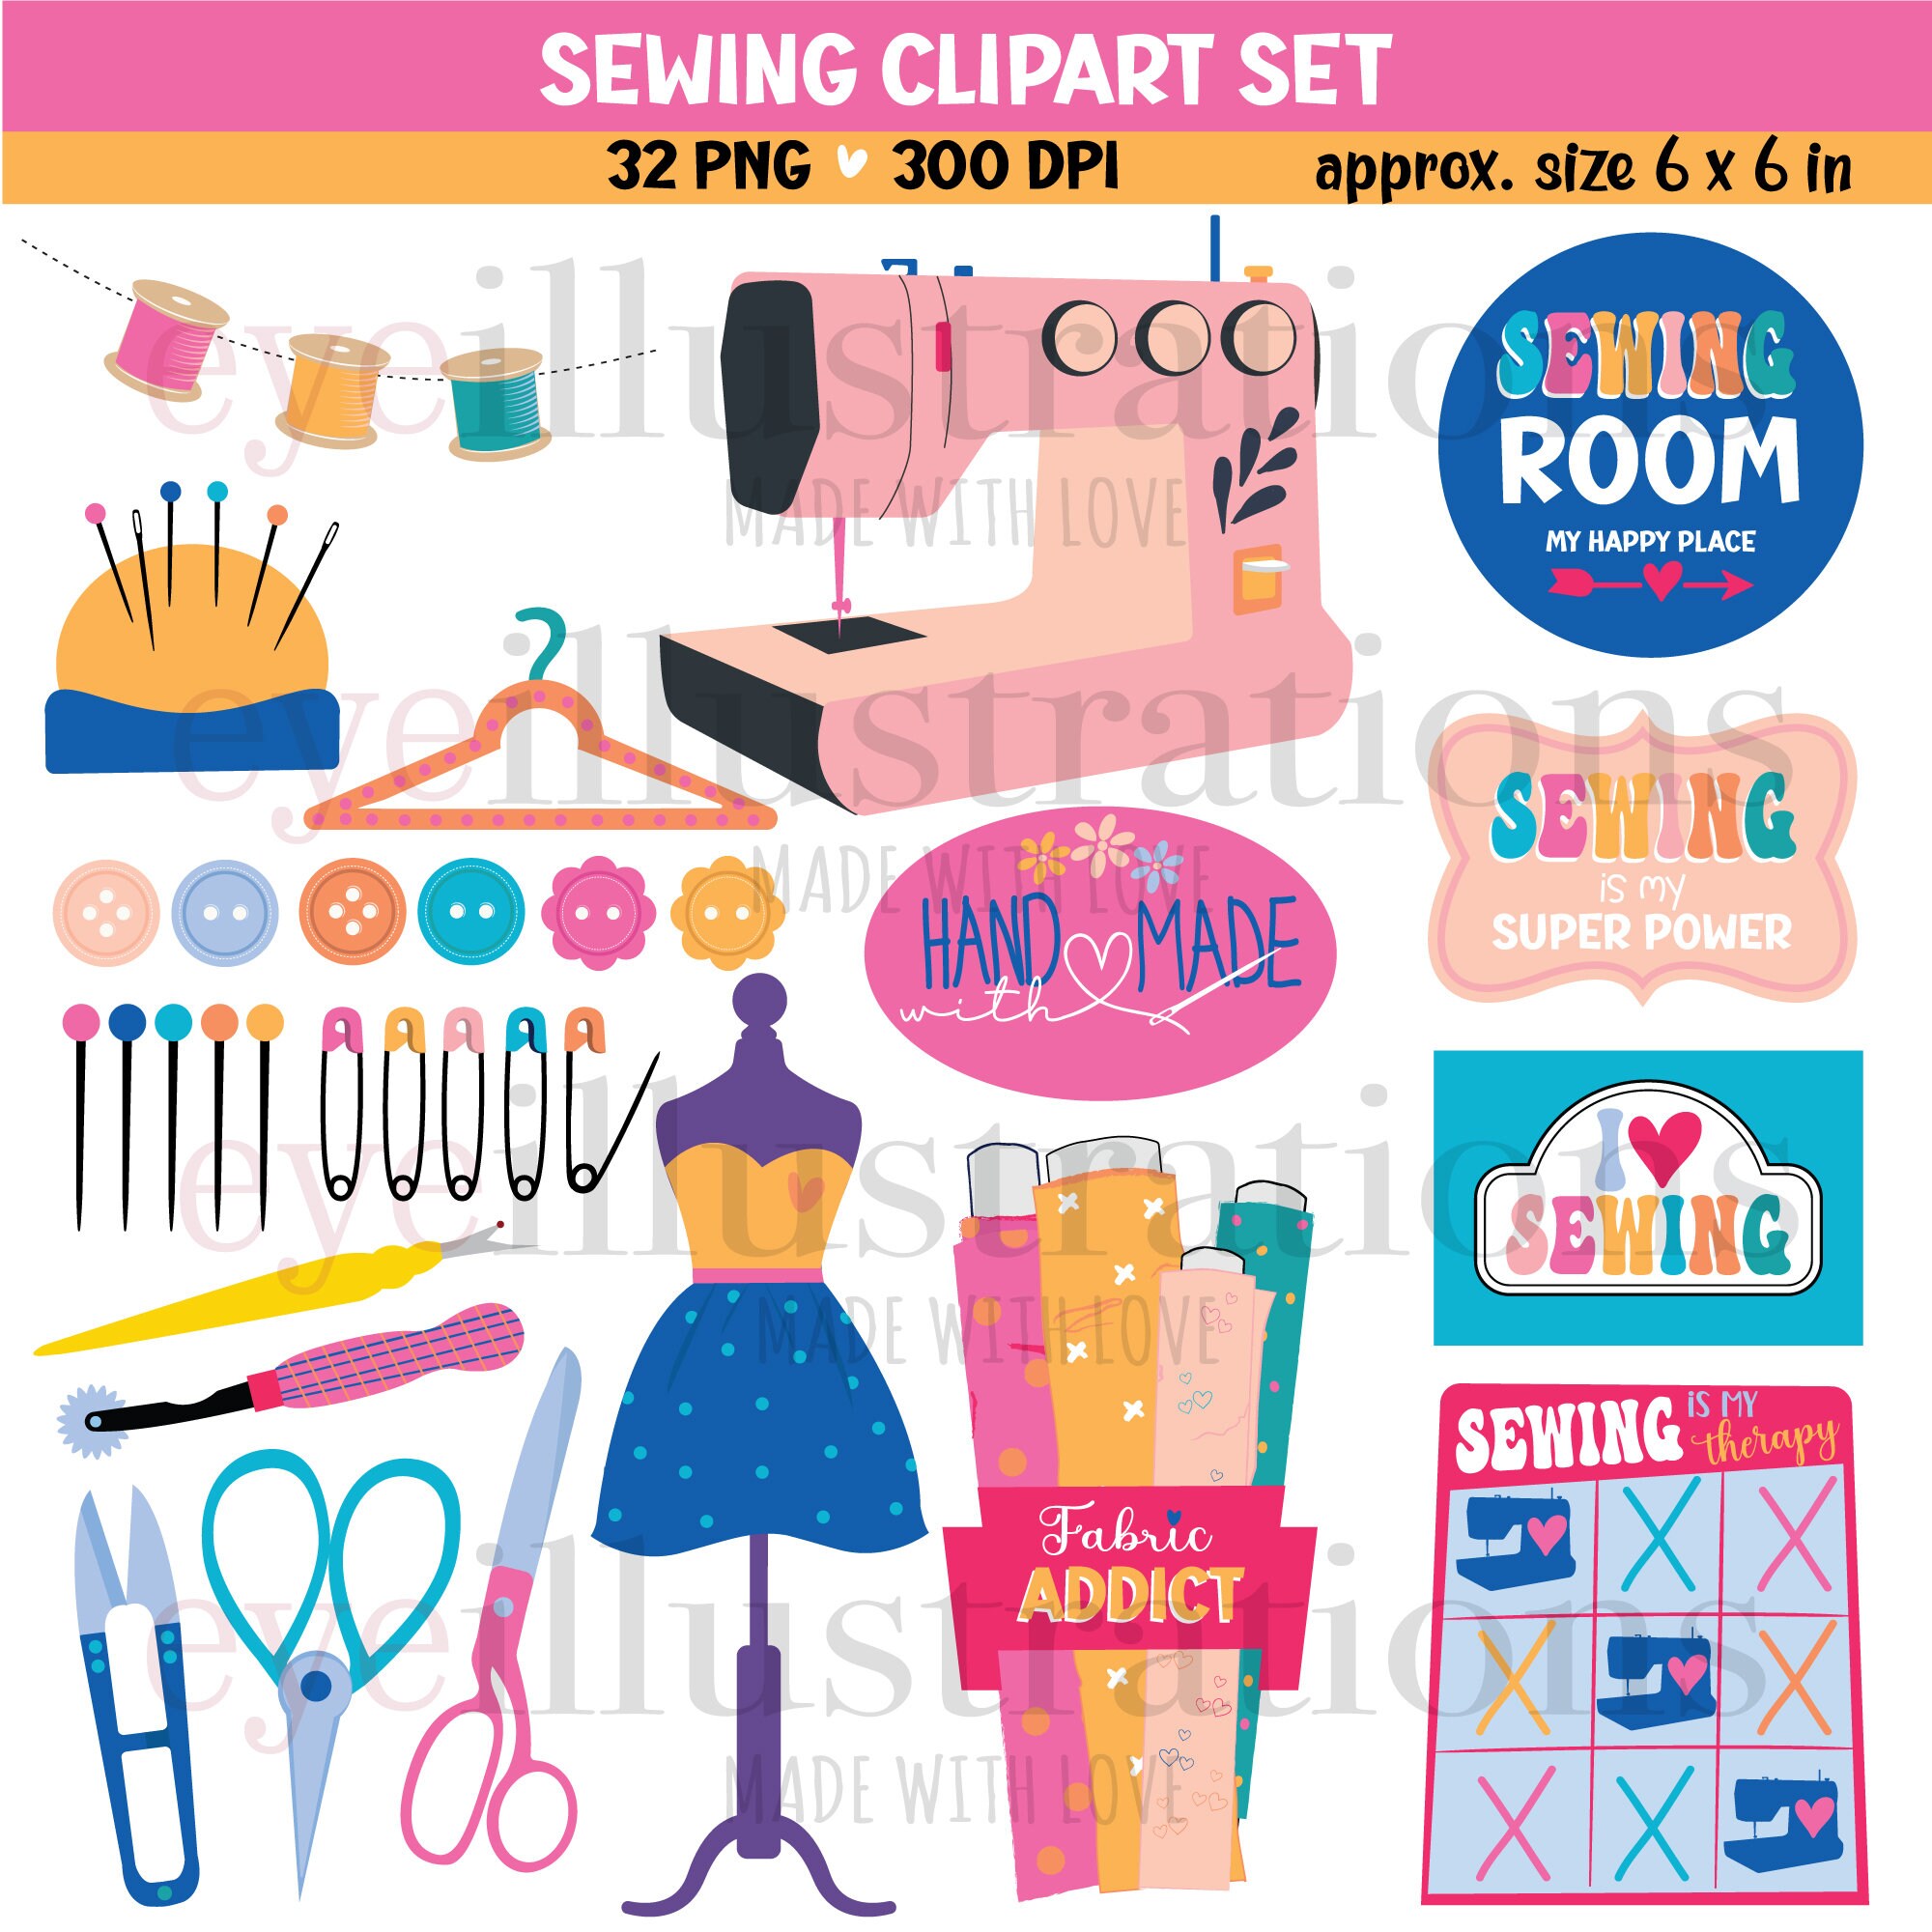 Cute Sewing Accessories Sticker Pack Sticker for Sale by TeeandToast